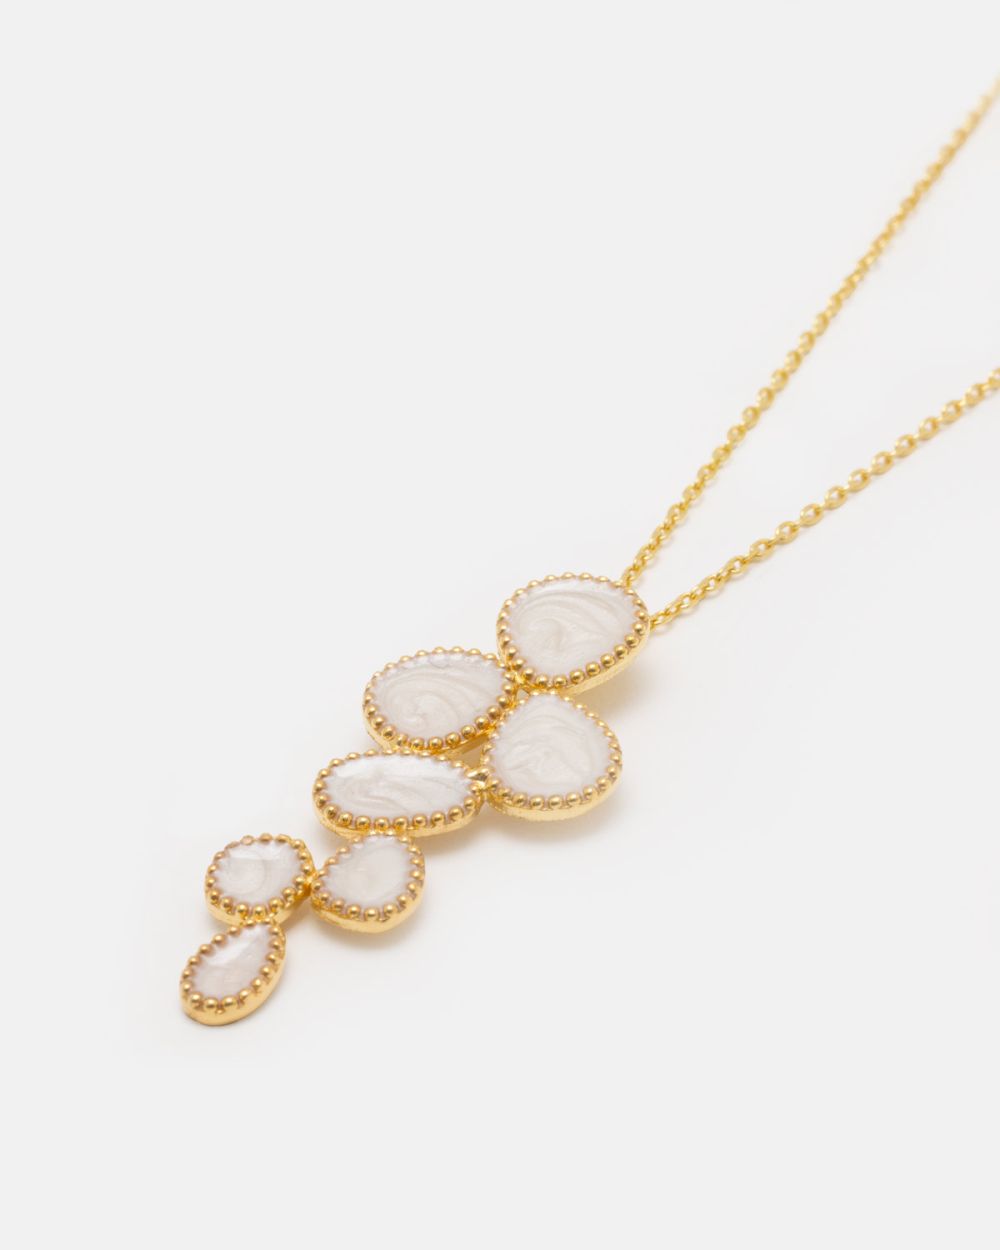 Lavish Necklace in Gold Plated Silver with Enamel